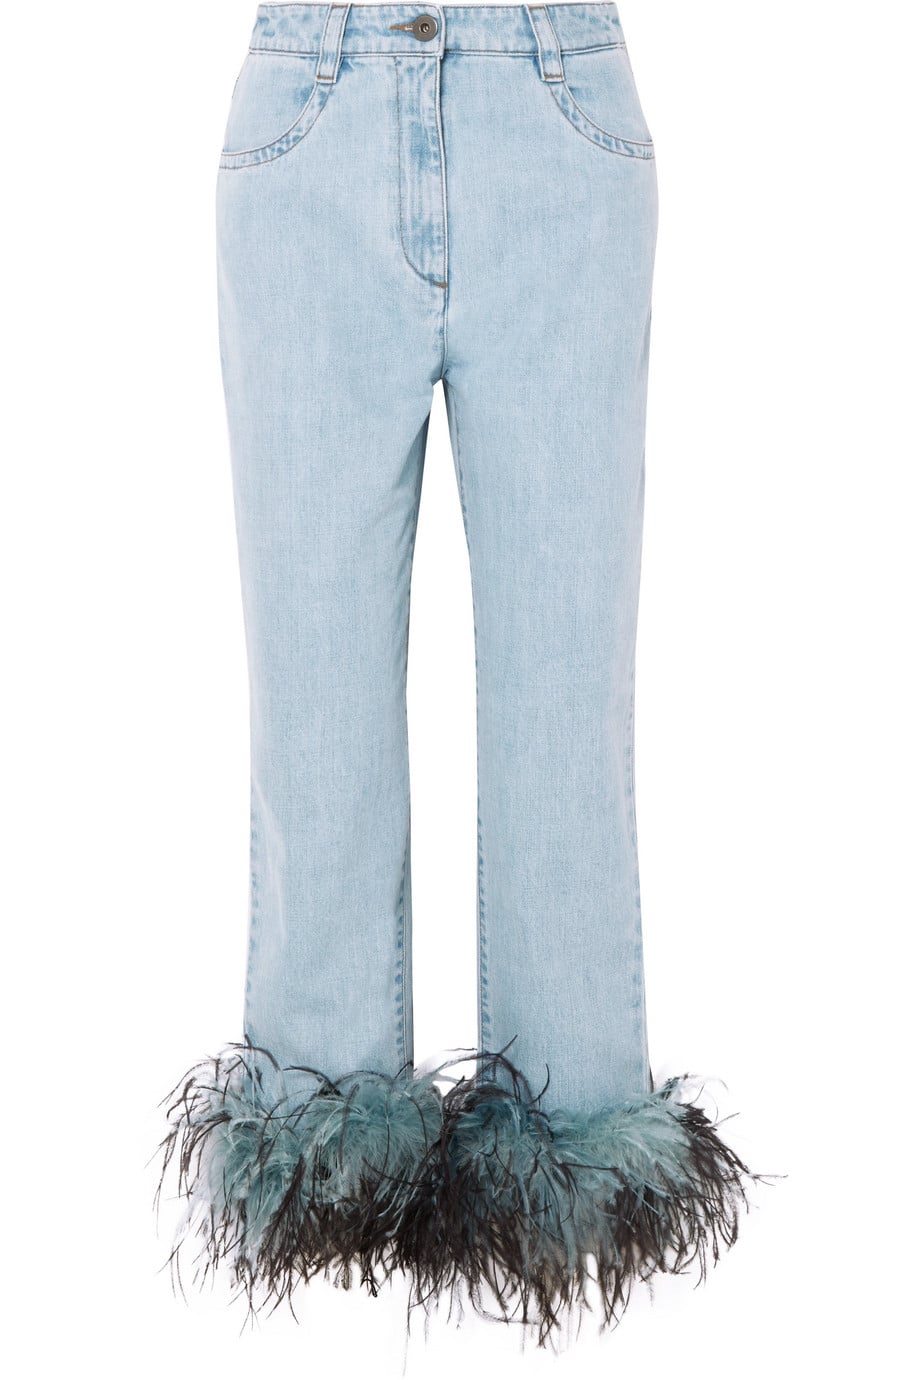 Prada Feather-Trimmed Boyfriend Jeans | 6 Spring Denim Trends to Know the  Next Time You're Shopping For Jeans | POPSUGAR Fashion Photo 7